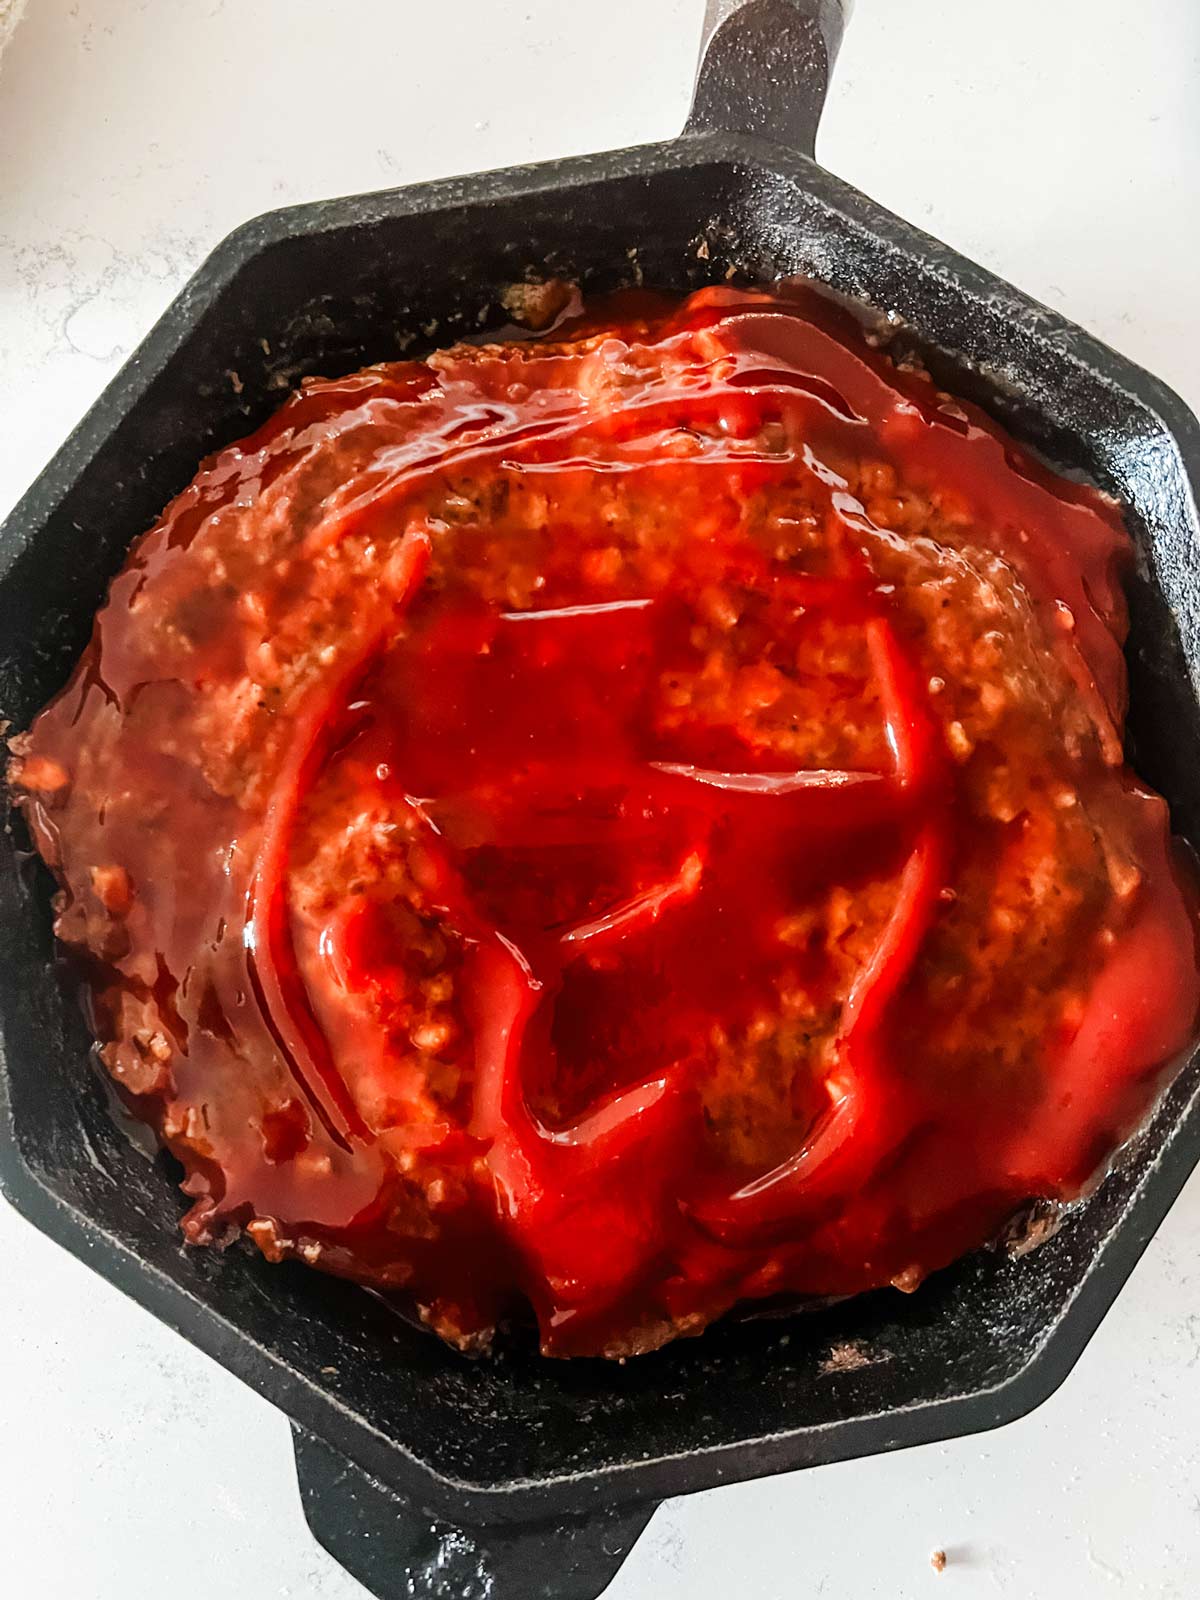 Meatloaf with glaze on it ready to return to the oven.